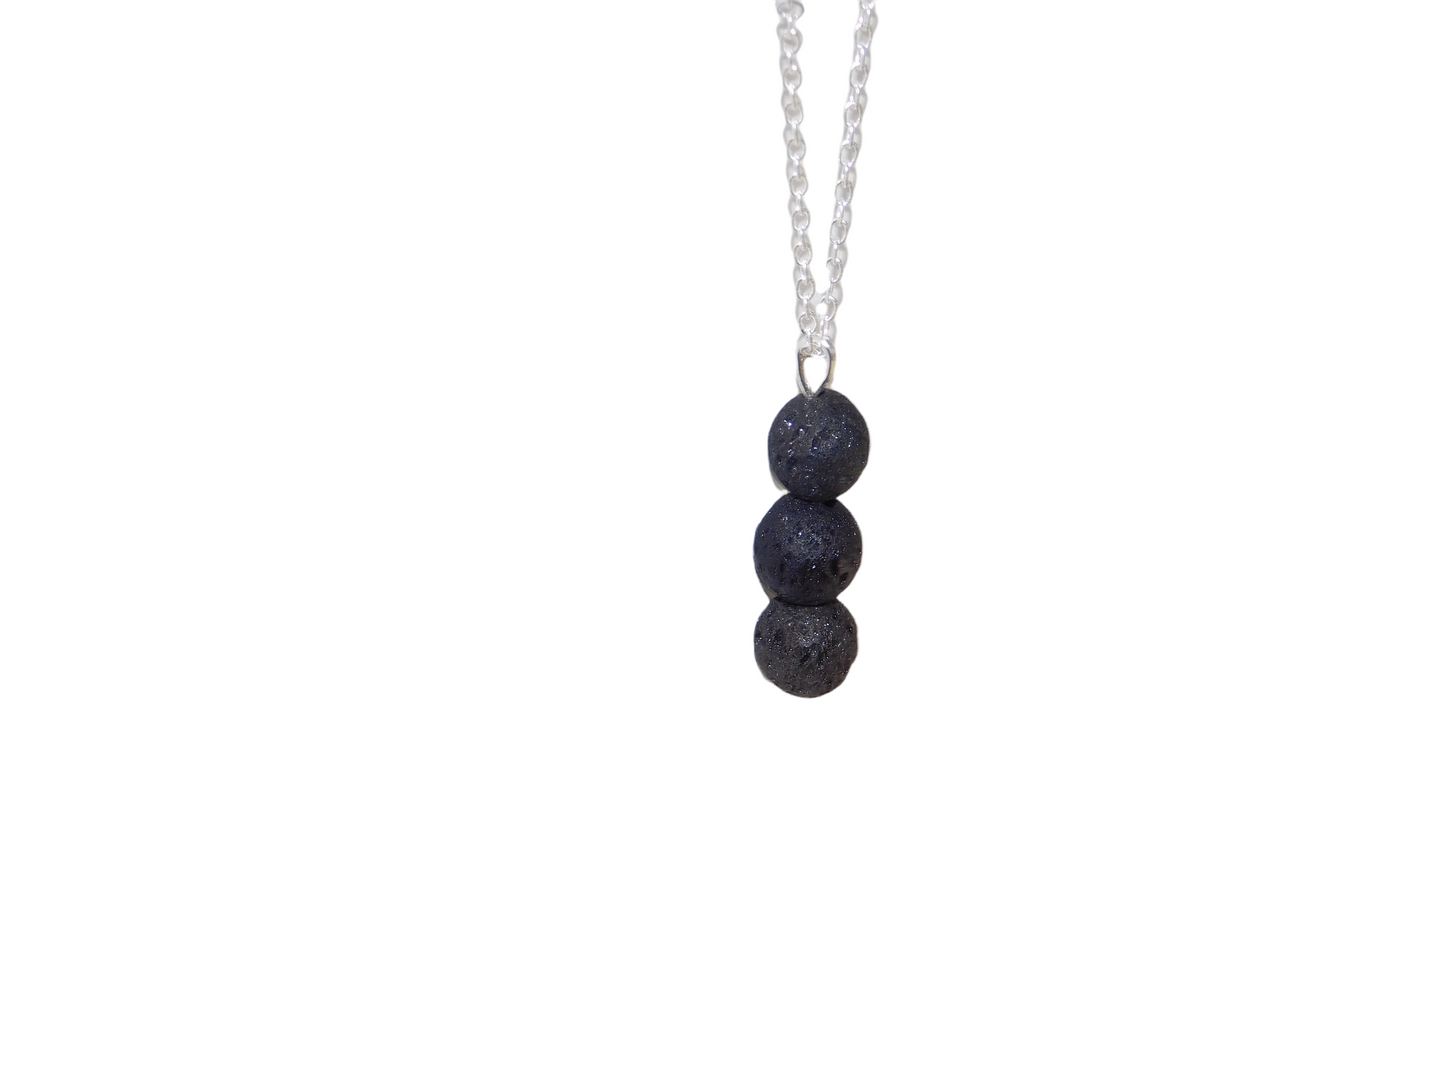 Black Aromatherapy Essential Oil Diffuser Necklace